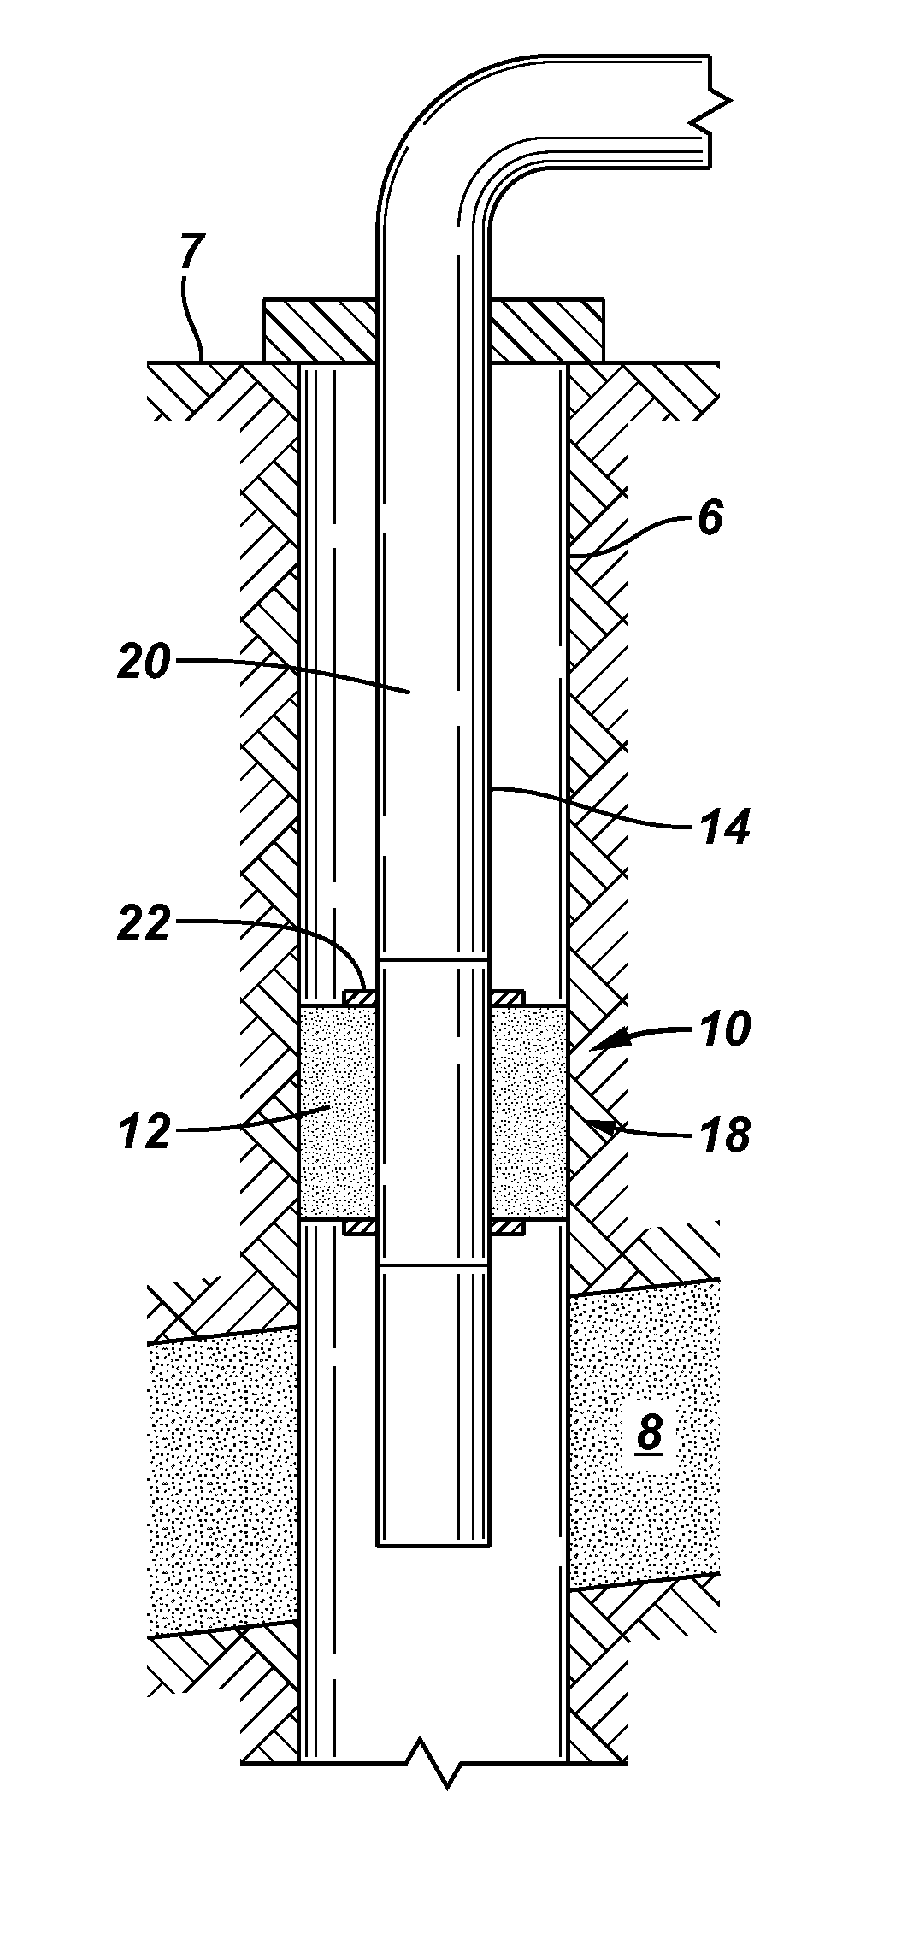 System and Method to Seal Using a Swellable Material